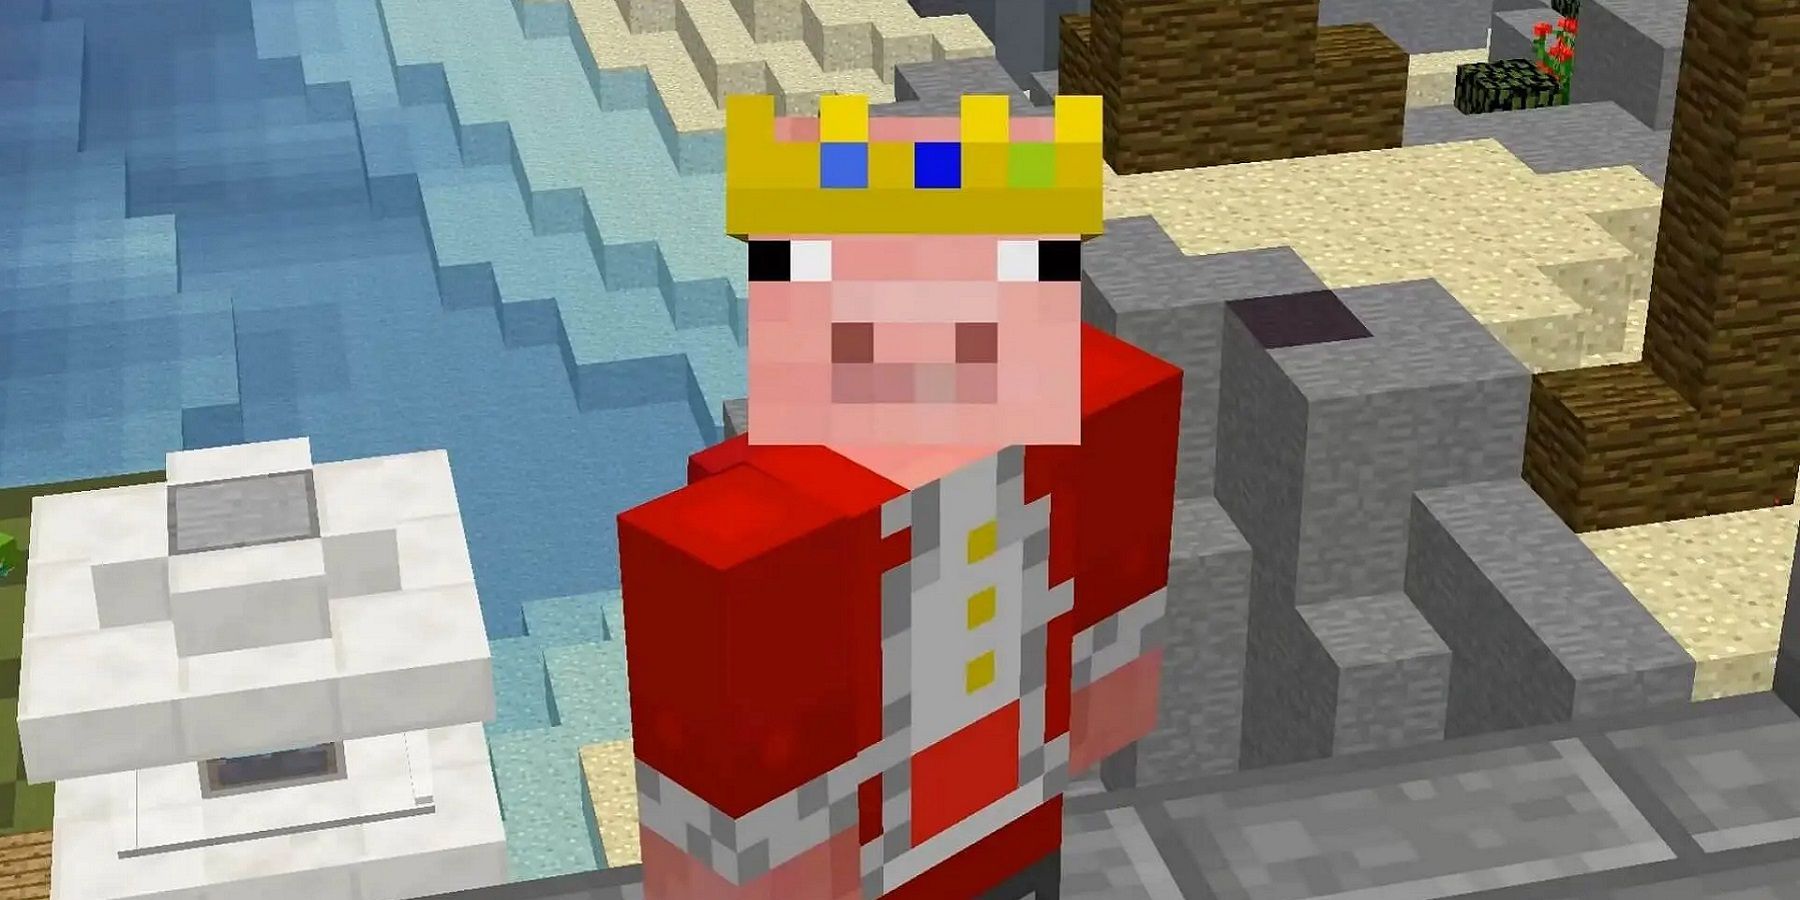 An image of Minecraft YouTuber Technoblade's trademark pig-like avatar.